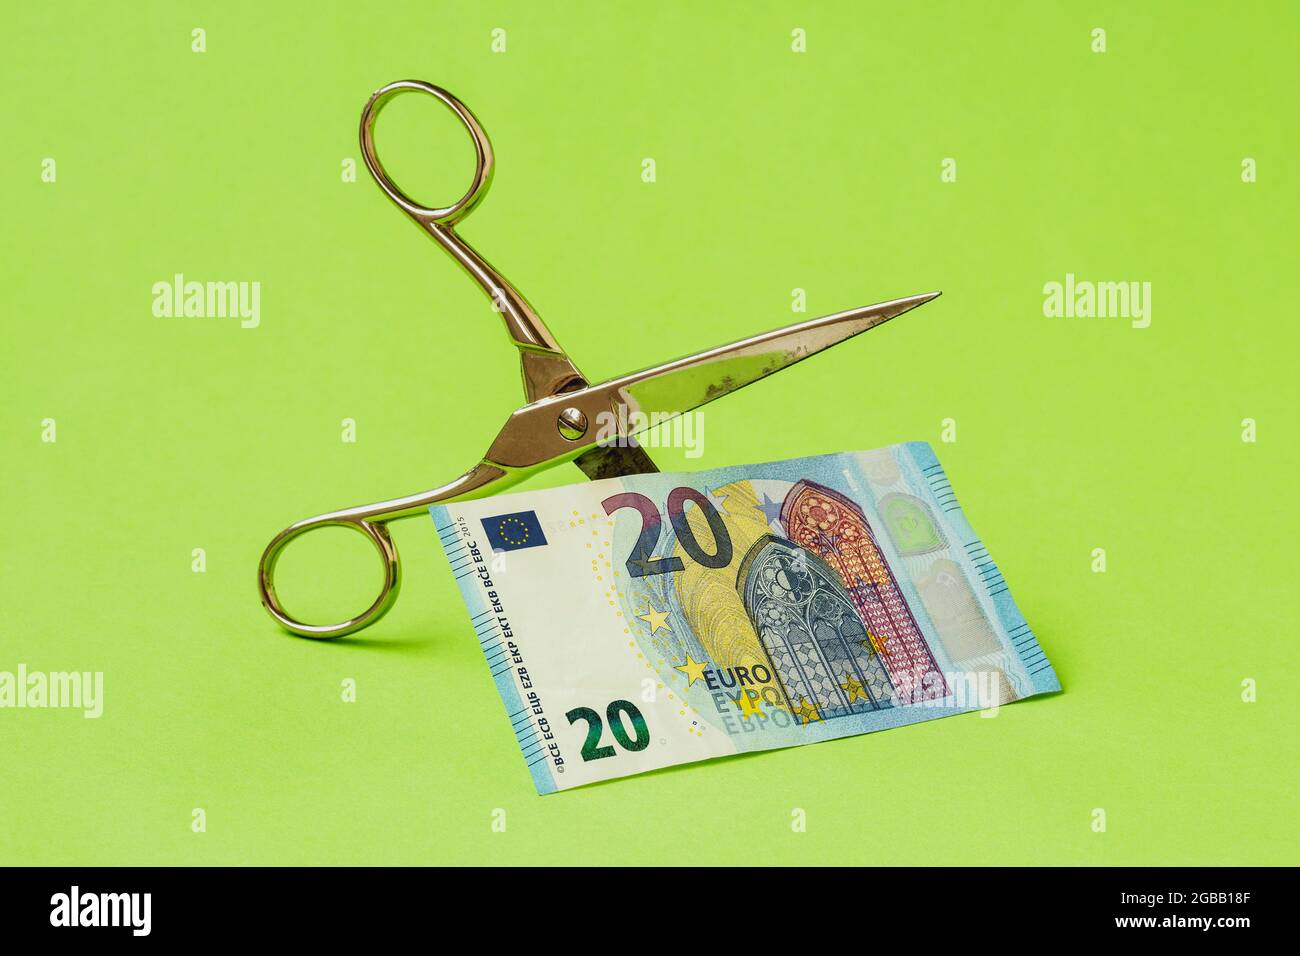 Cutting twenty Euro note with scissors on green background. Devaluation of Euro currency. Stock Photo